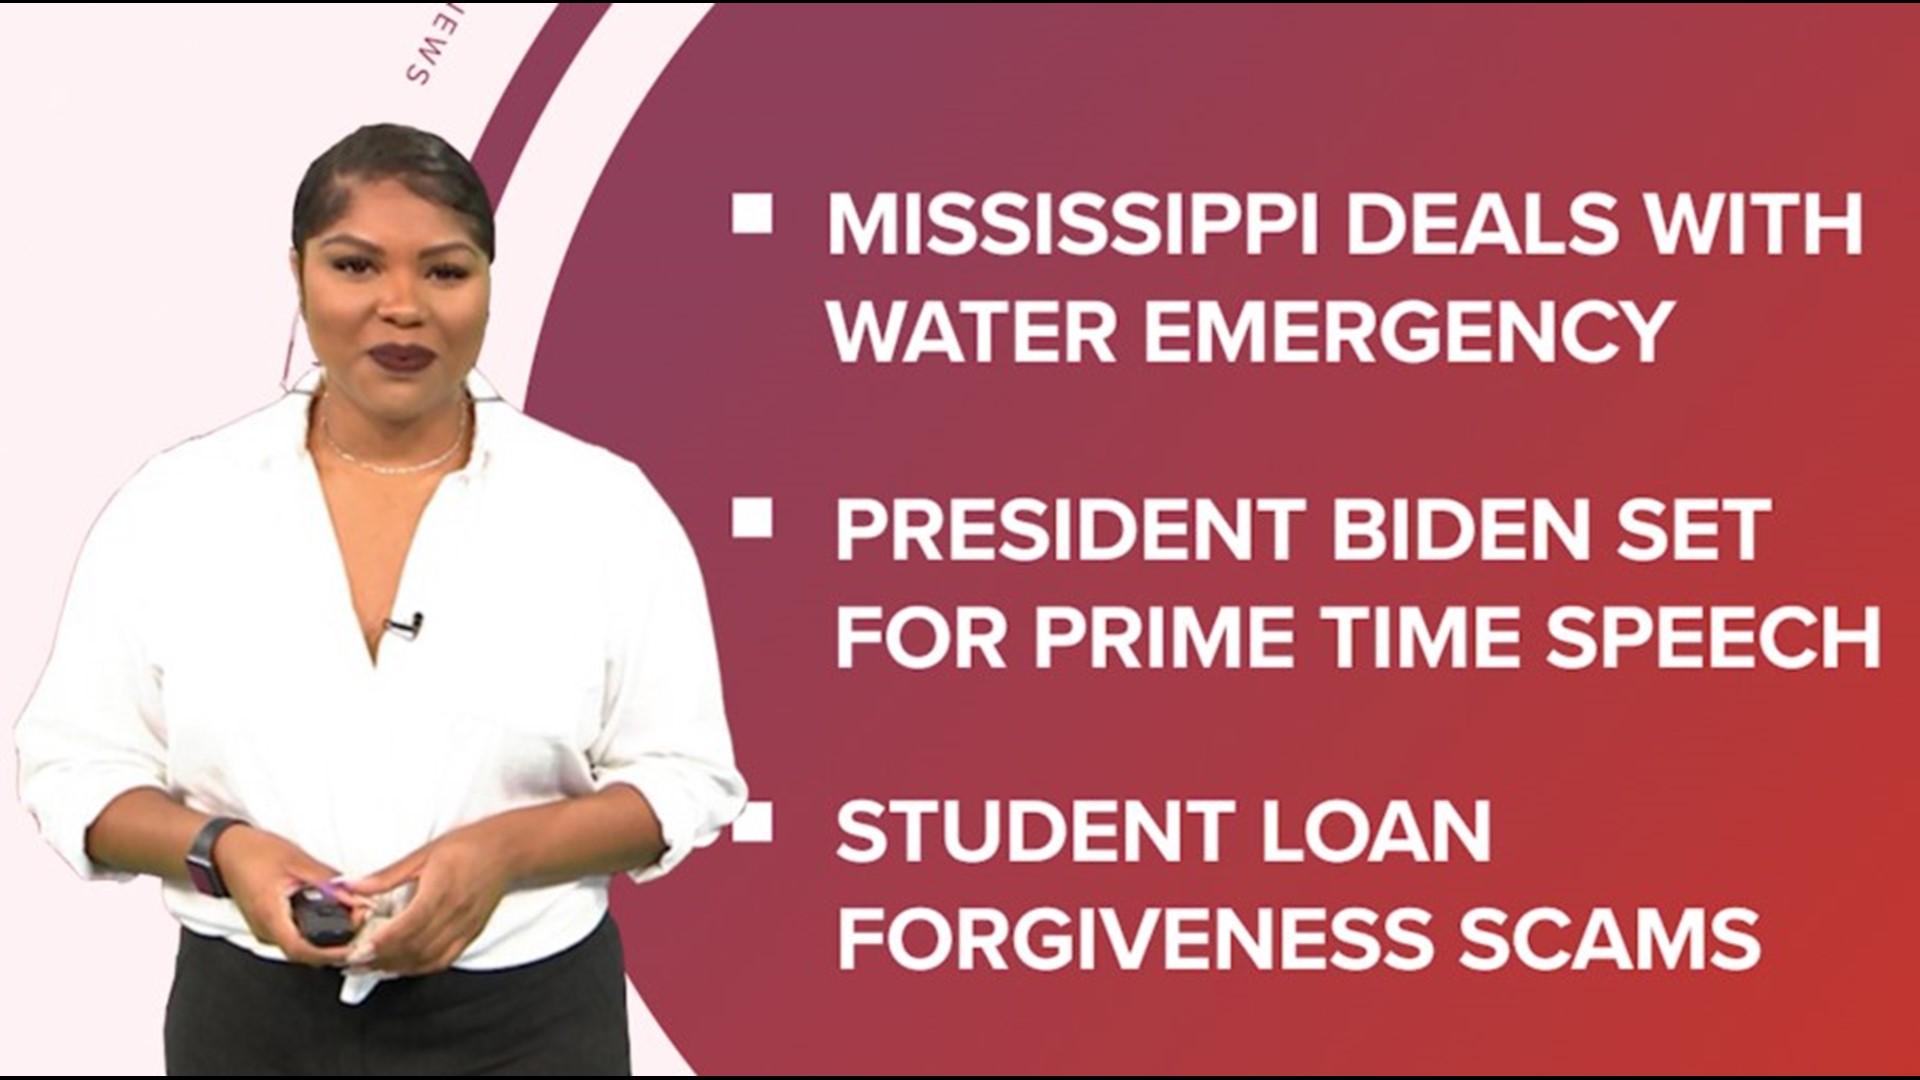 A look at what is happening in the news from a water emergency in Mississippi to student loan forgiveness scams.